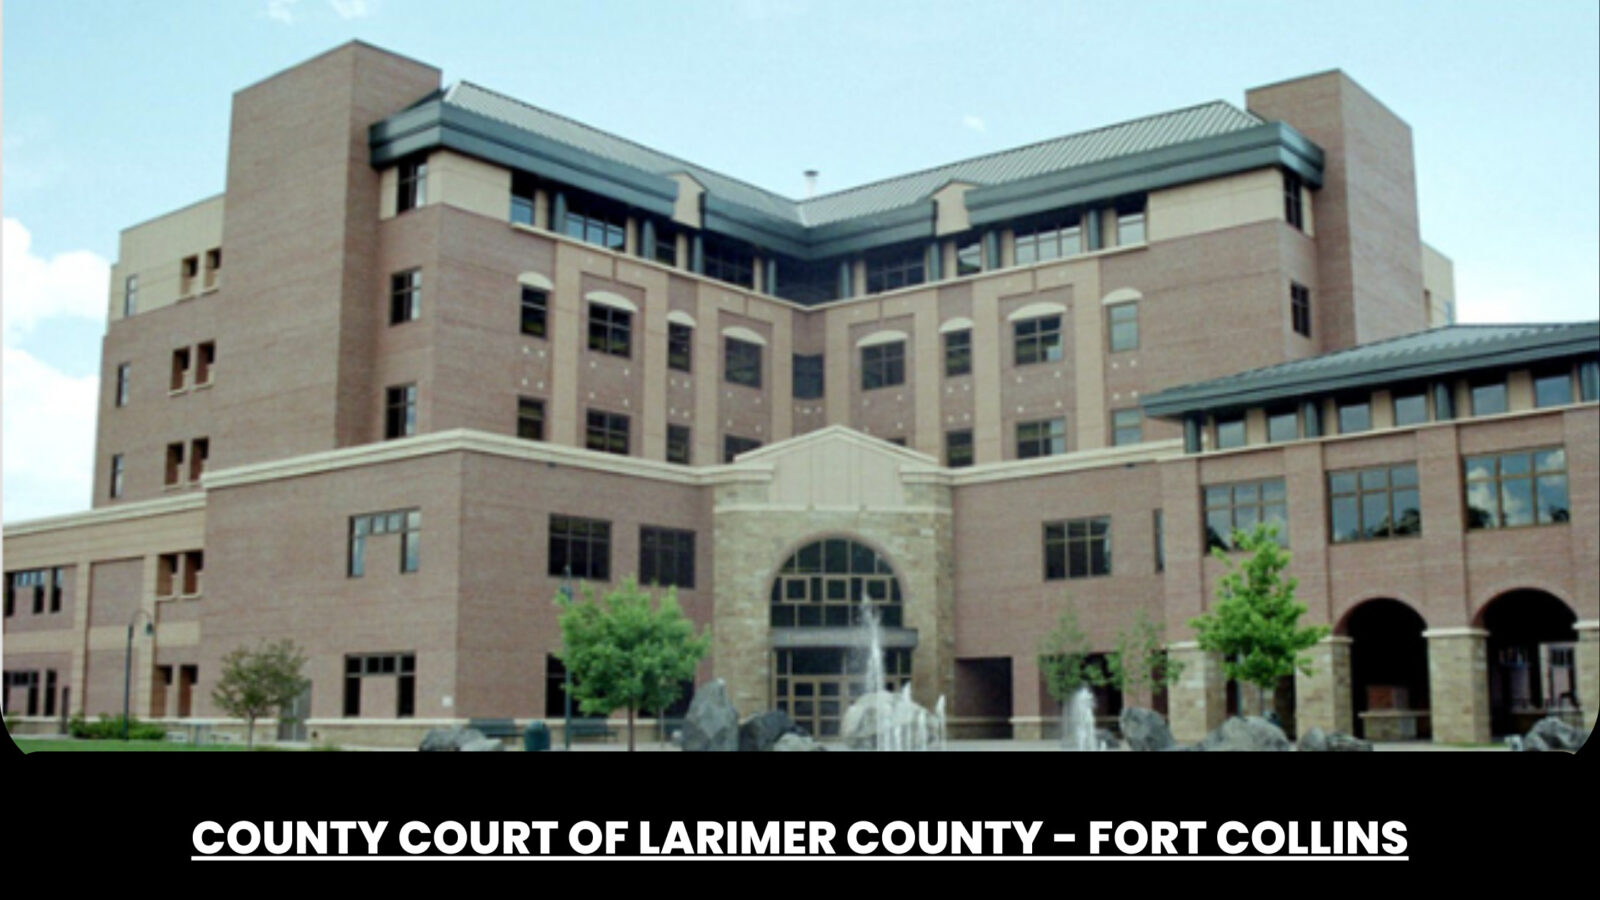 County Court of Larimer County Fort Collins